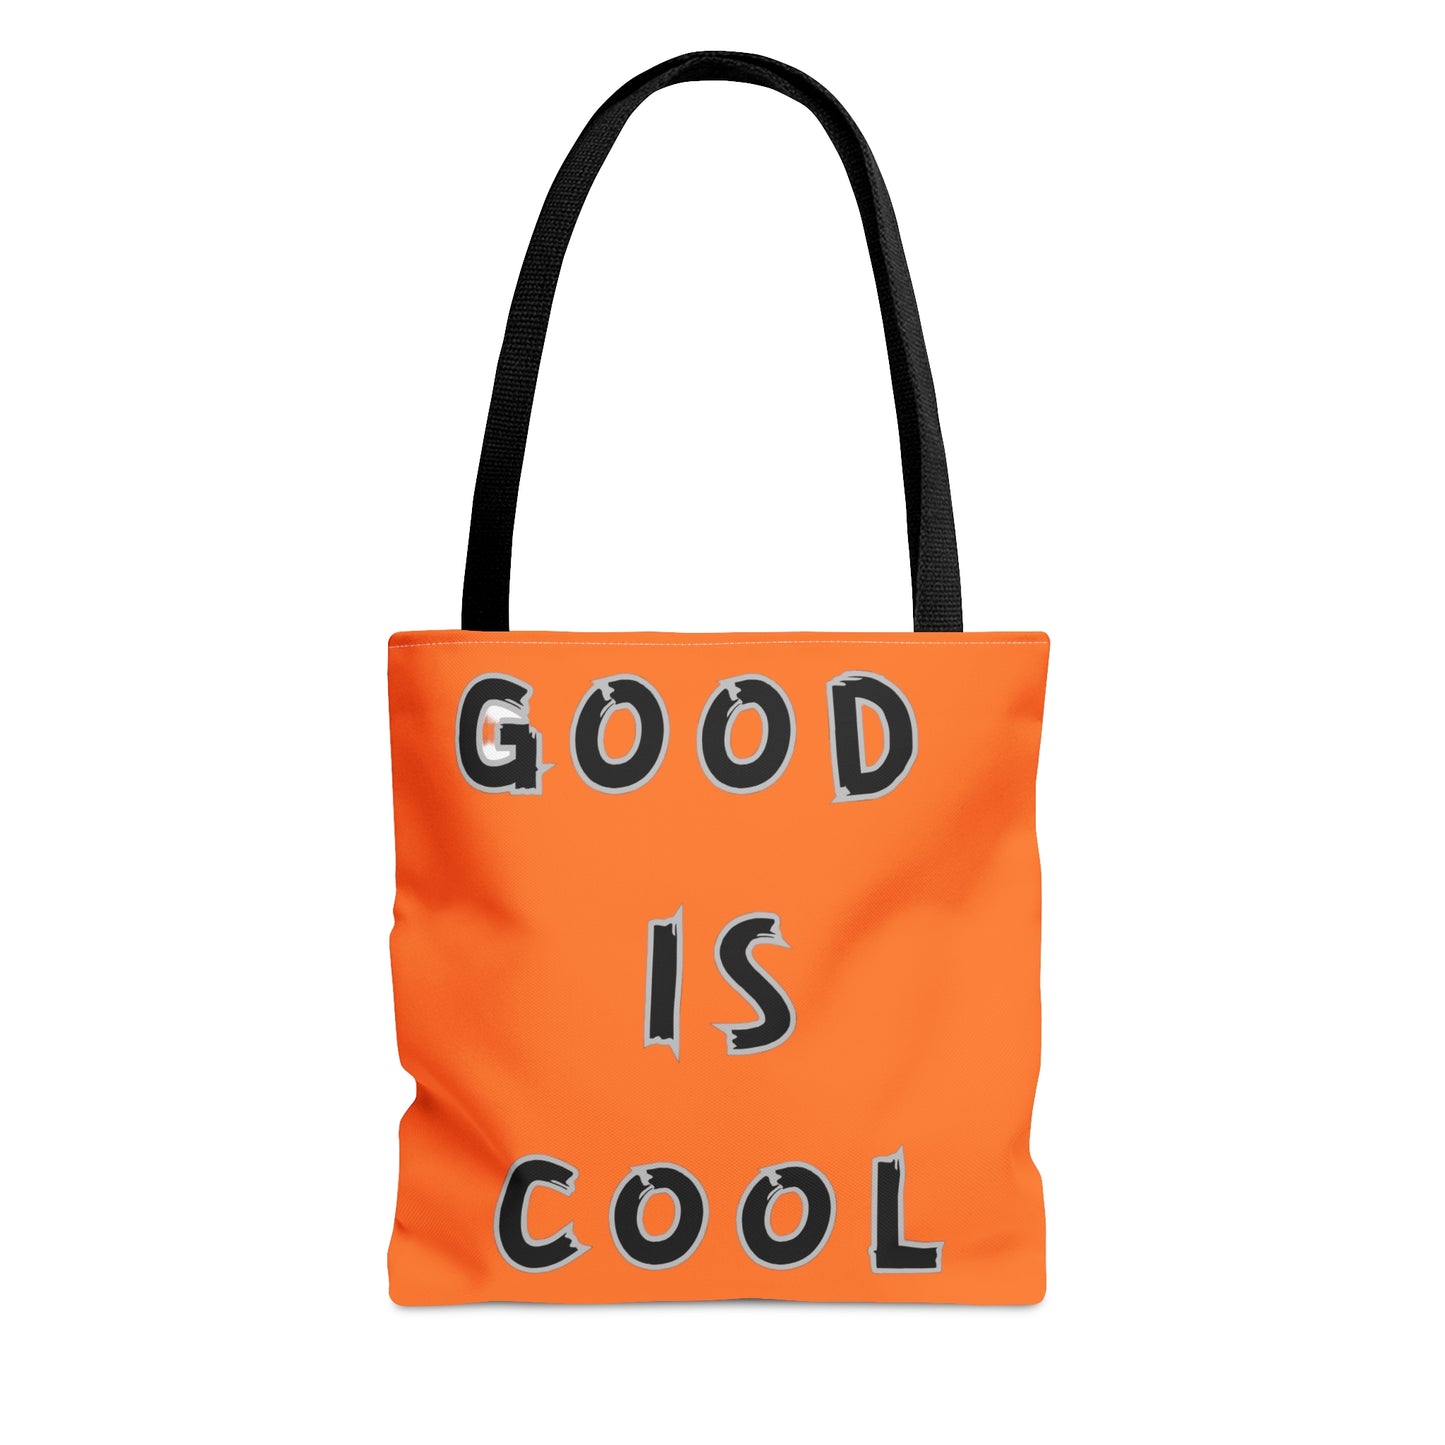 GOOD IS COOL printed on both sides of this tote bag.Let’s celebrate goodness! Come in 3 sizes to meet your needs.